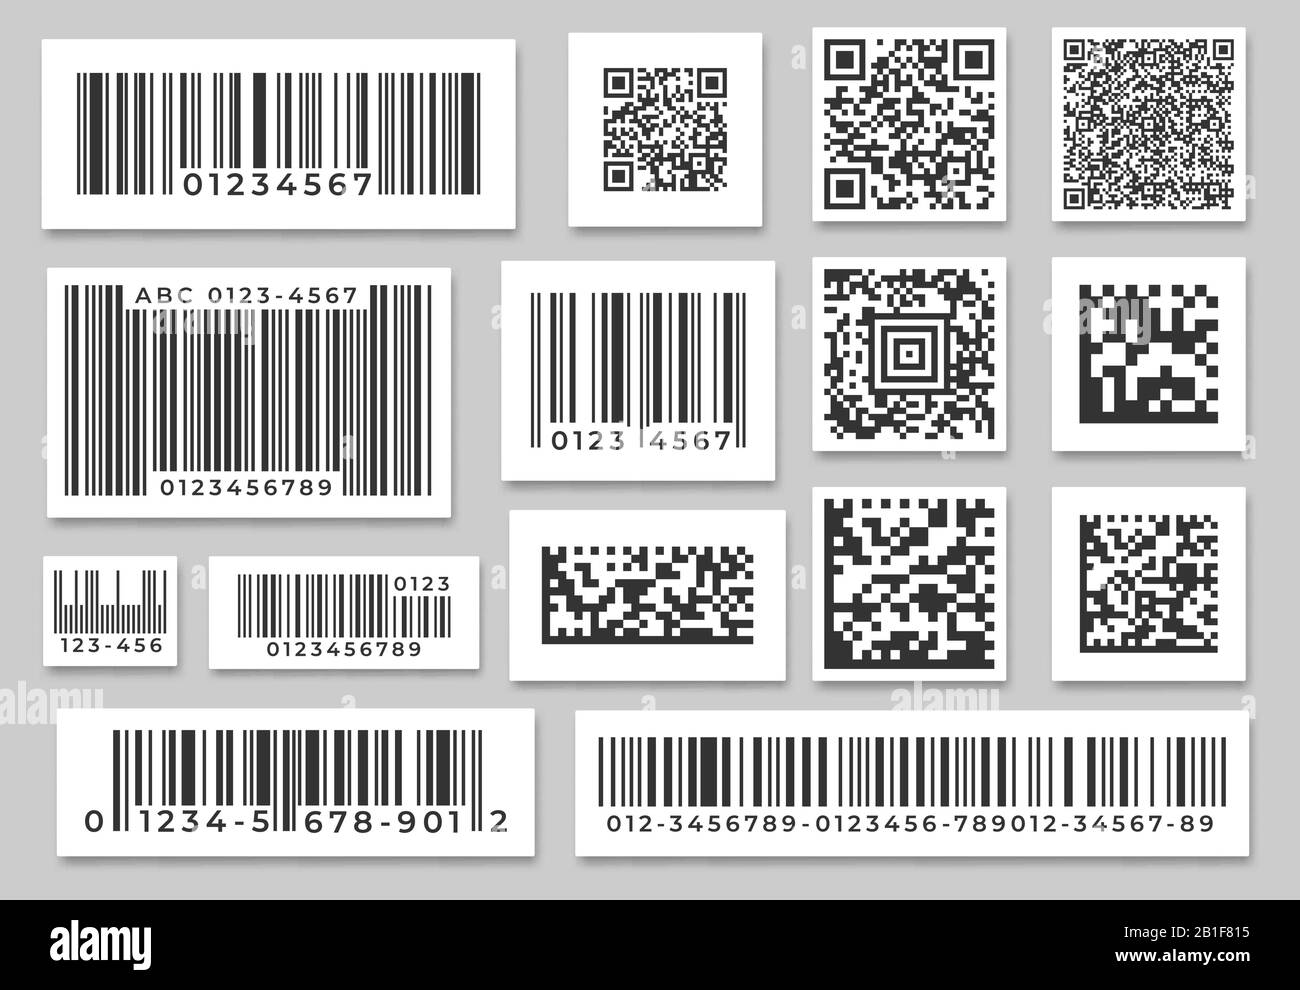 Barcode labels. Code stripes sticker, digital bar label and retail pricing bars labeling stickers. Industrial barcodes vector set Stock Vector